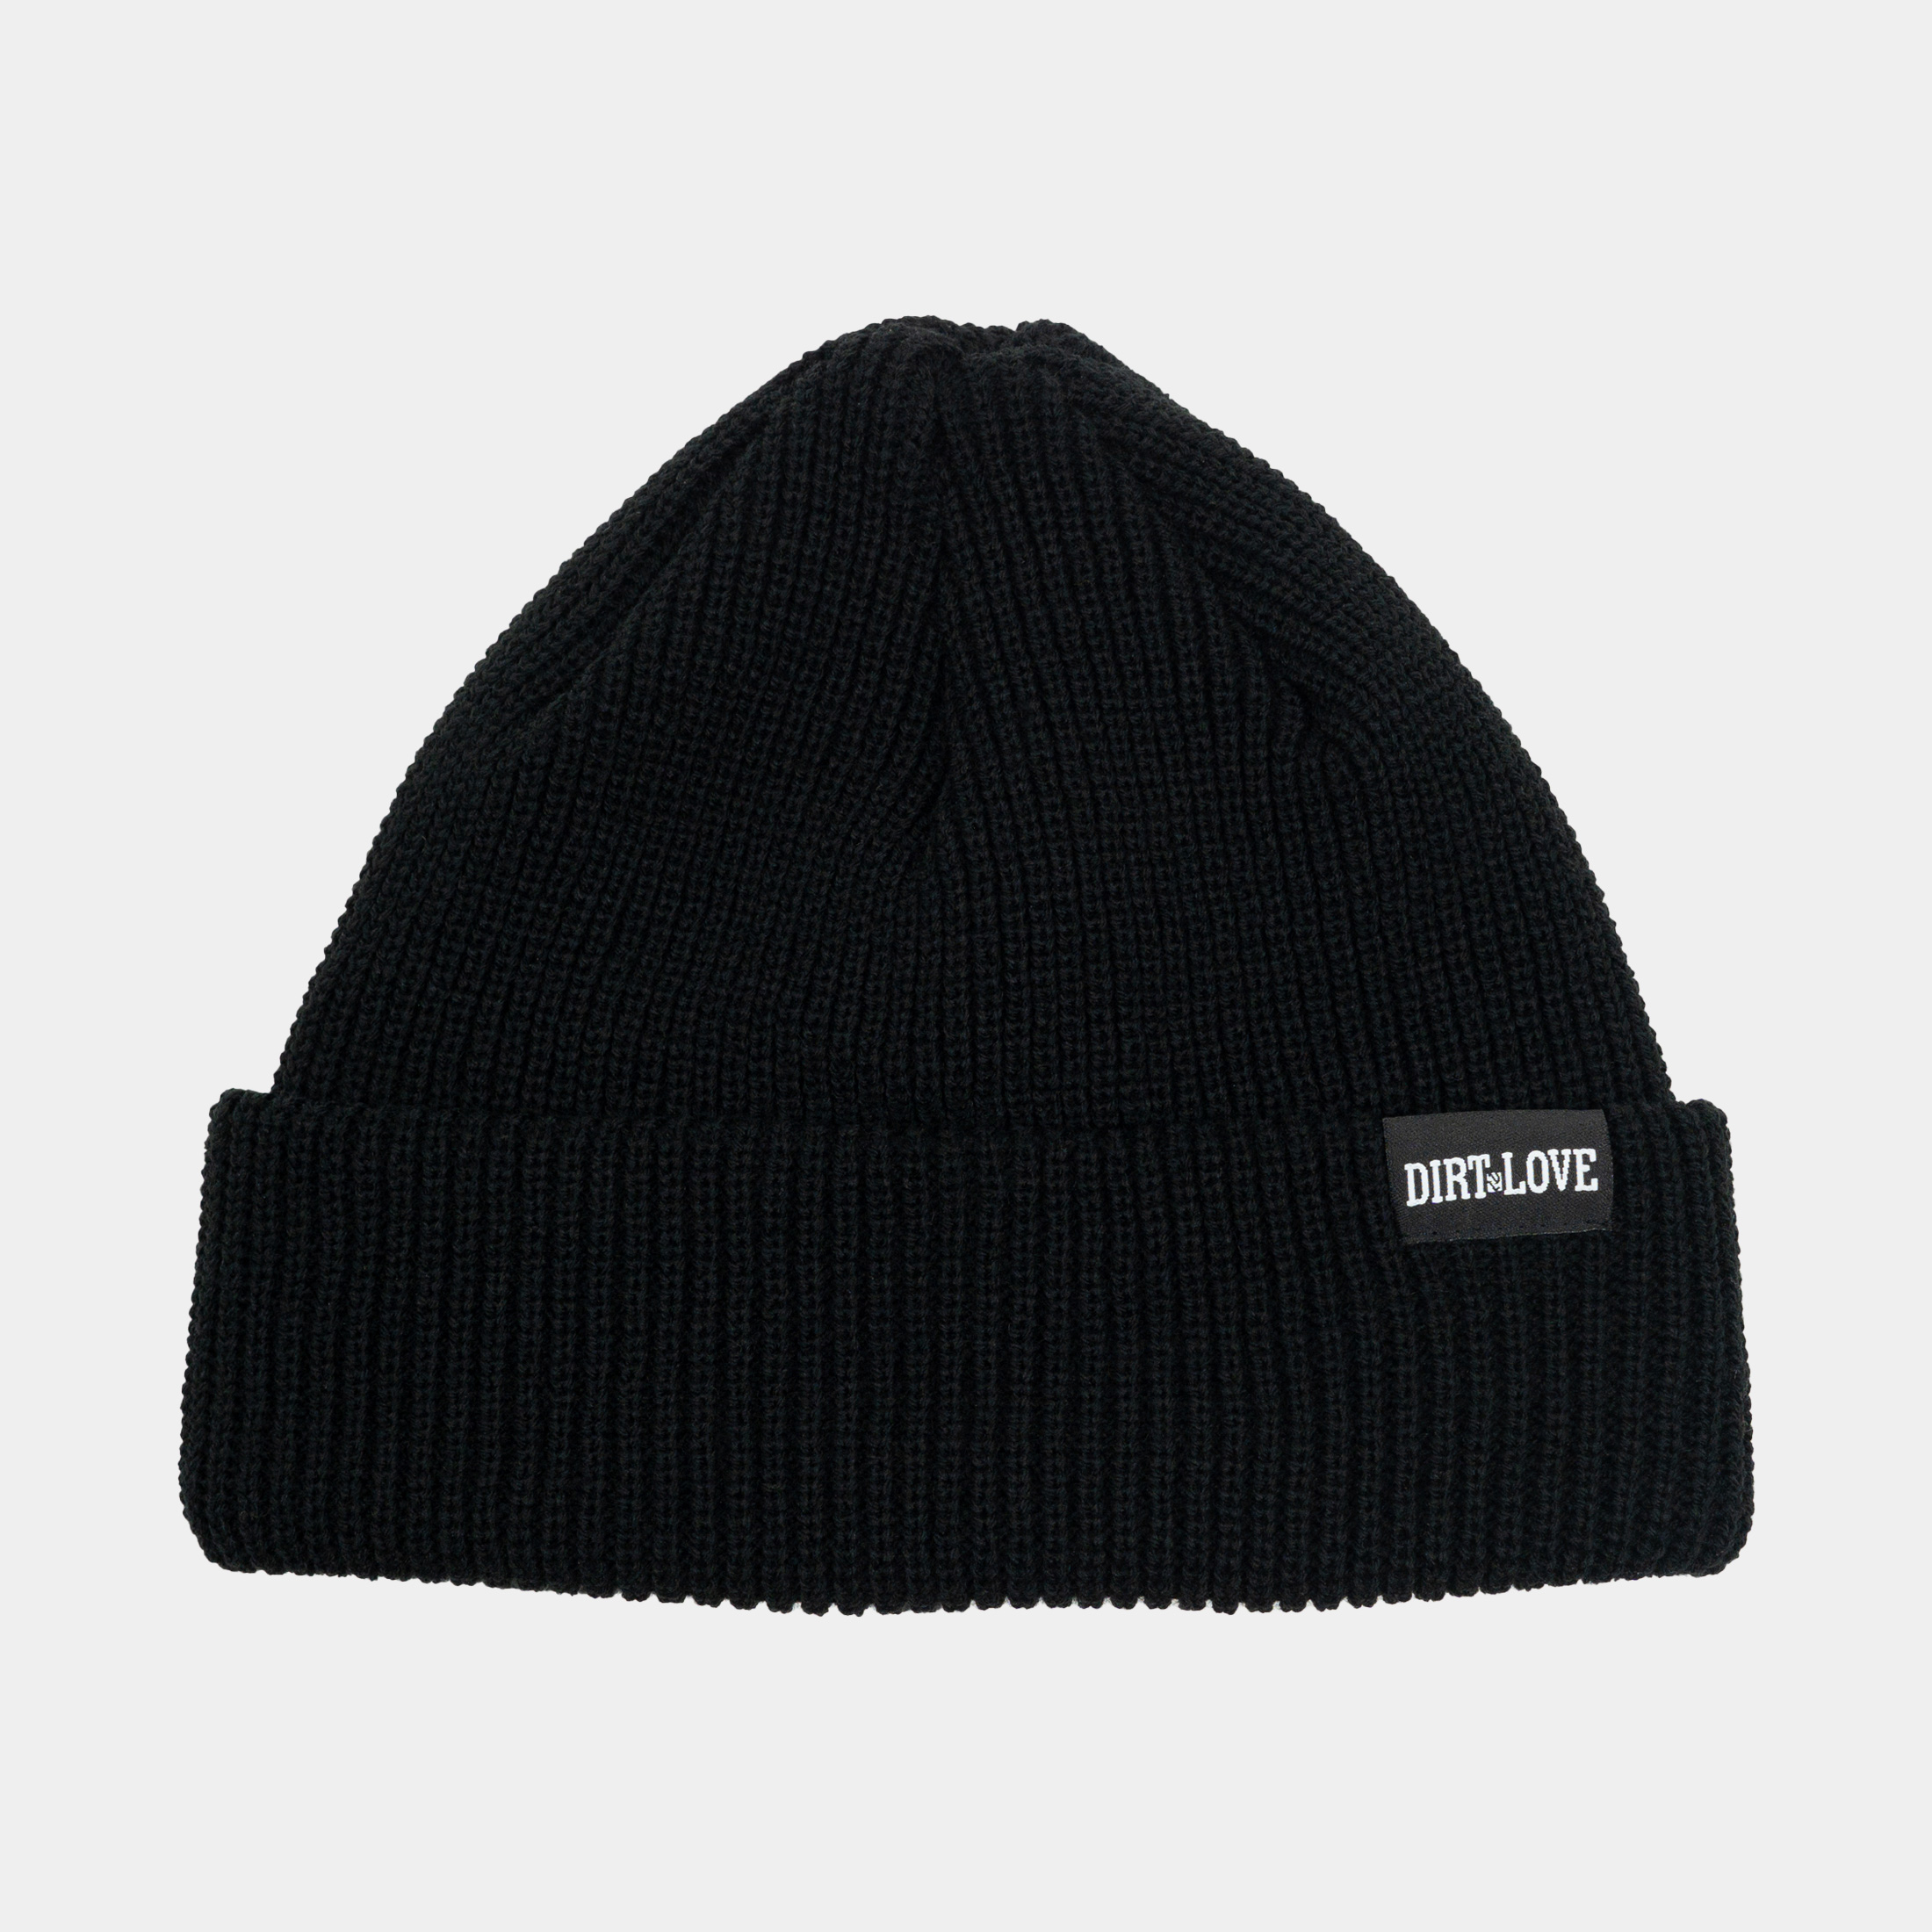 Dirt Love Label Beanie MADE IN EUROPE